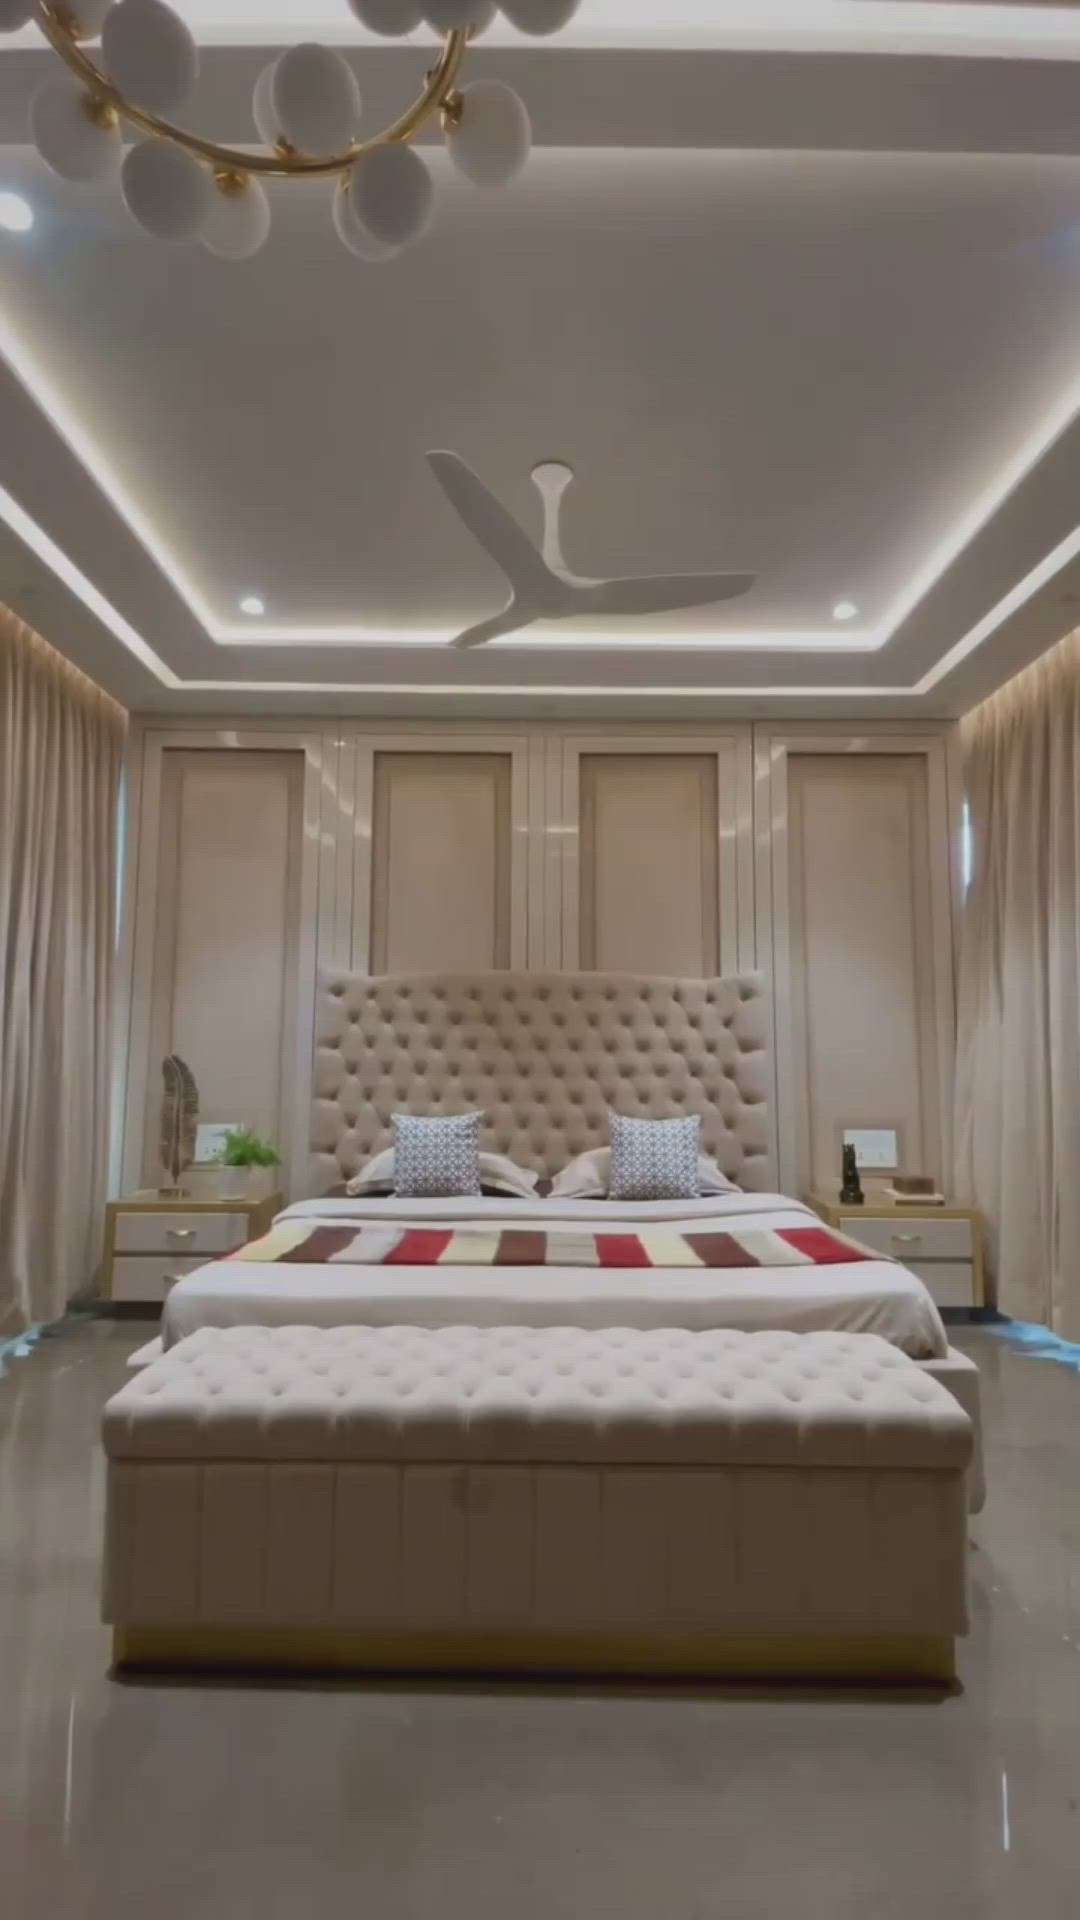 Aryas interio & Infra Group An essence of luxury,
Provide complete end to end Professional Construction & interior Services in Delhi Ncr, Gurugram, Ghaziabad, Noida, Greater Noida, Faridabad, chandigarh, Manali and Shimla. Contact us right now for any interior or renovation work, call us @ +91-7018188569 &
Visit our website at www.designinterios.com
Follow us on Instagram #aryasinterio and Facebook @aryasinterio .
#uttarpradesh #Delhihome #delhi #himachal 
#noidainterior #noida #delhincr  #noidaconstruction #interiordesign #interior #interiors #interiordesigner #interiordecor #interiorstyling #delhiinteriors #greaternoida #faridabad #ghaziabadinterior #ghaziabad  #chandigarh